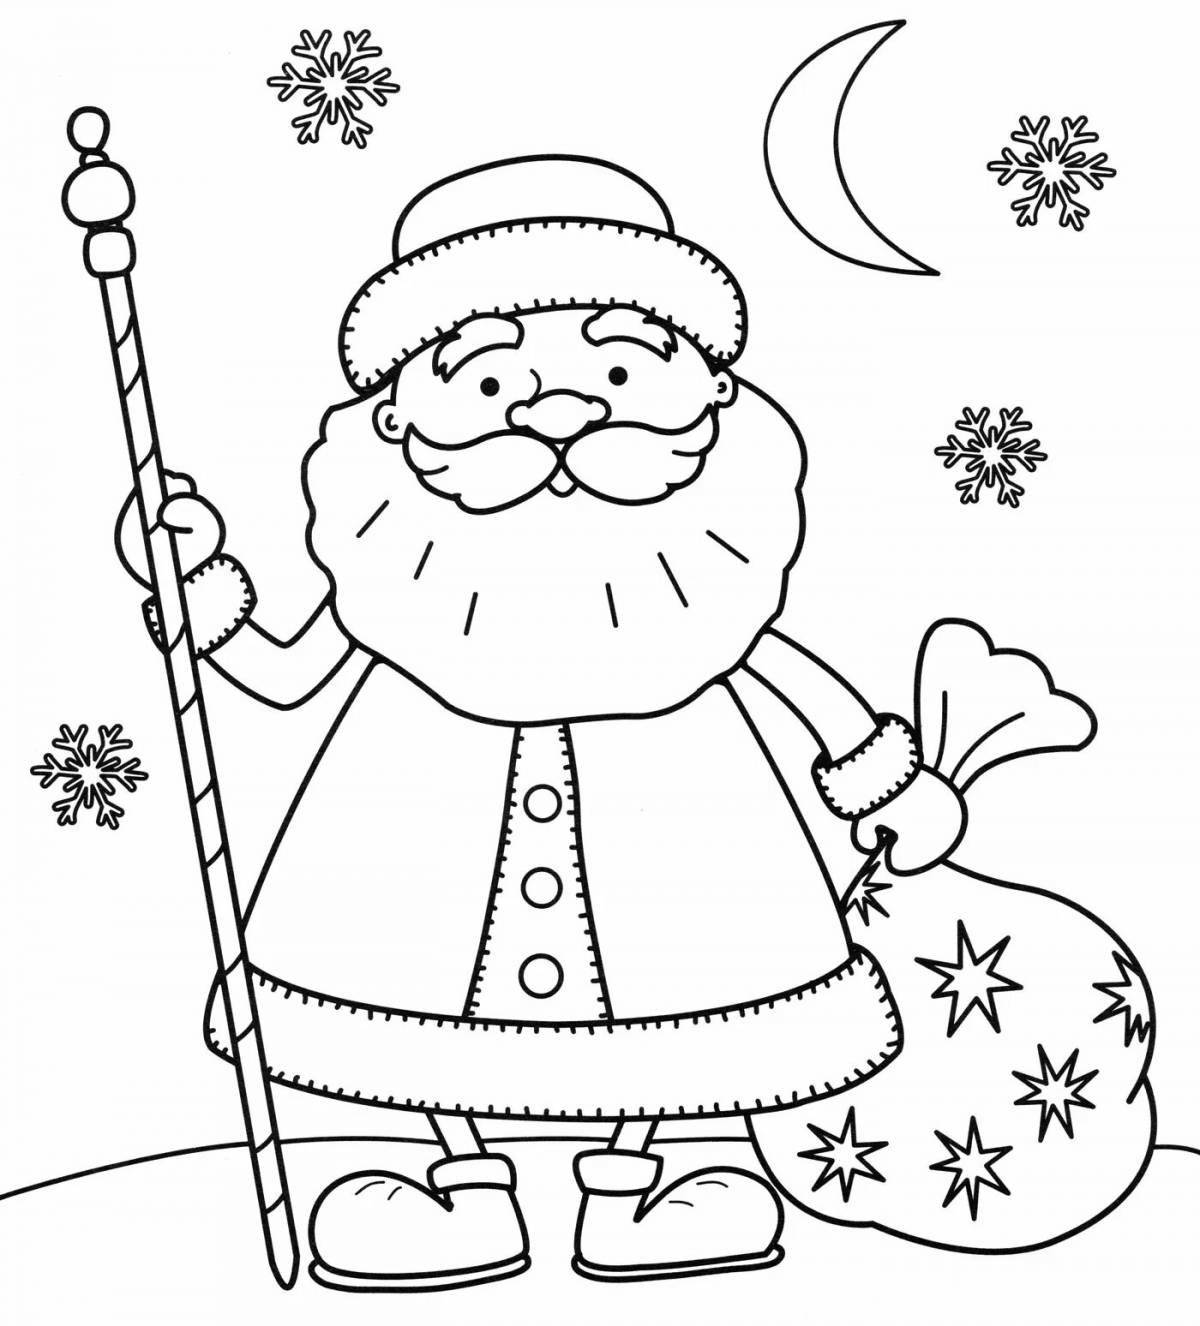 Coloring page cheerful santa claus with a bag